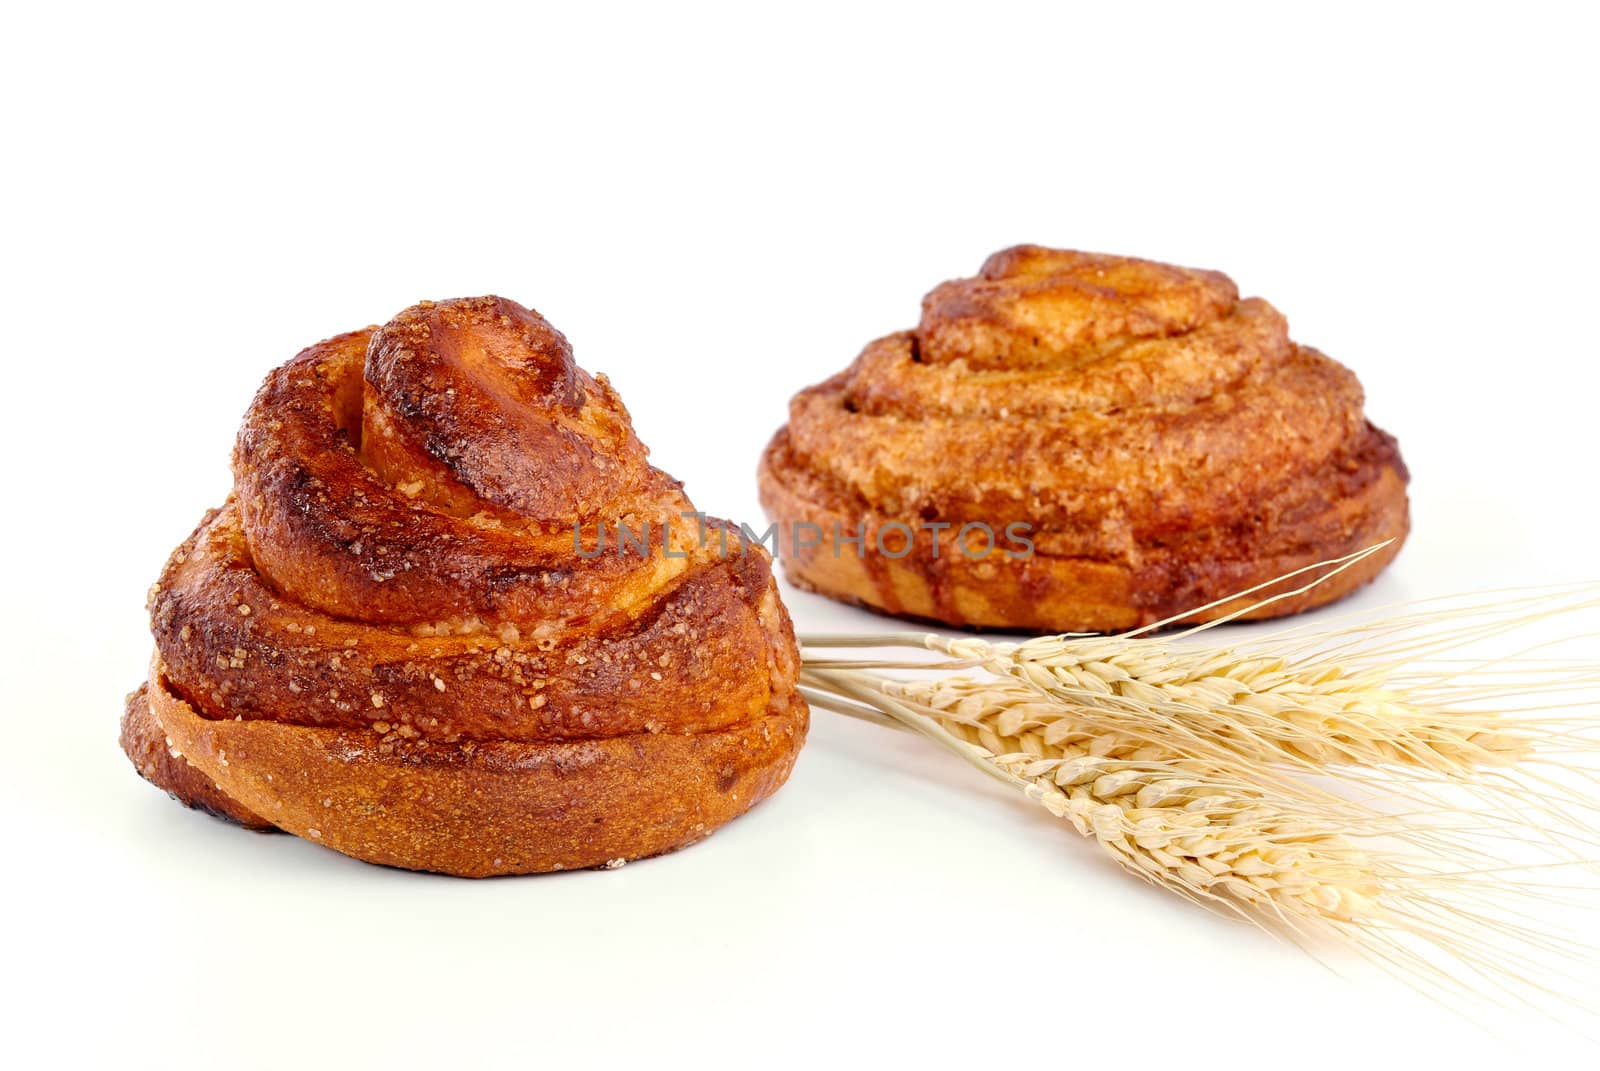 Cinnamon rolls with ear of wheat closeup on a white background